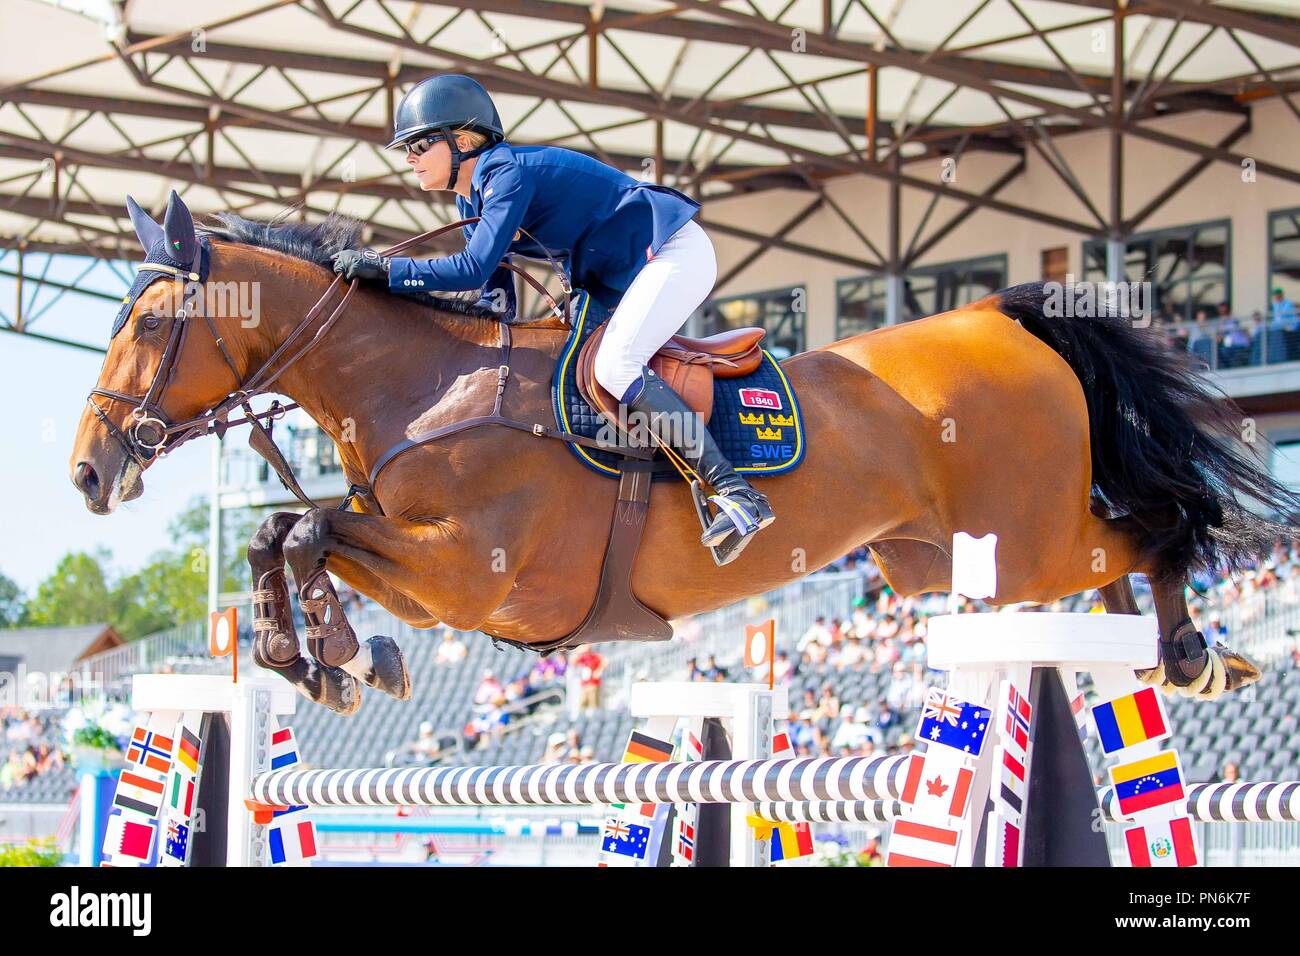 Tryon, California, USA. 19th Sept 2018. Malin Baryard-Johnsson riding H&M Indiana. SWE. FEI World Team & Individual Jumping Championships. First Competition. Shiowjumping. 1.55m. Table C. Day 8. World Equestrian Games. WEG 2018 Tryon. North Carolina. USA. 19/09/2018. Credit: Sport In Pictures/Alamy Live News Stock Photo